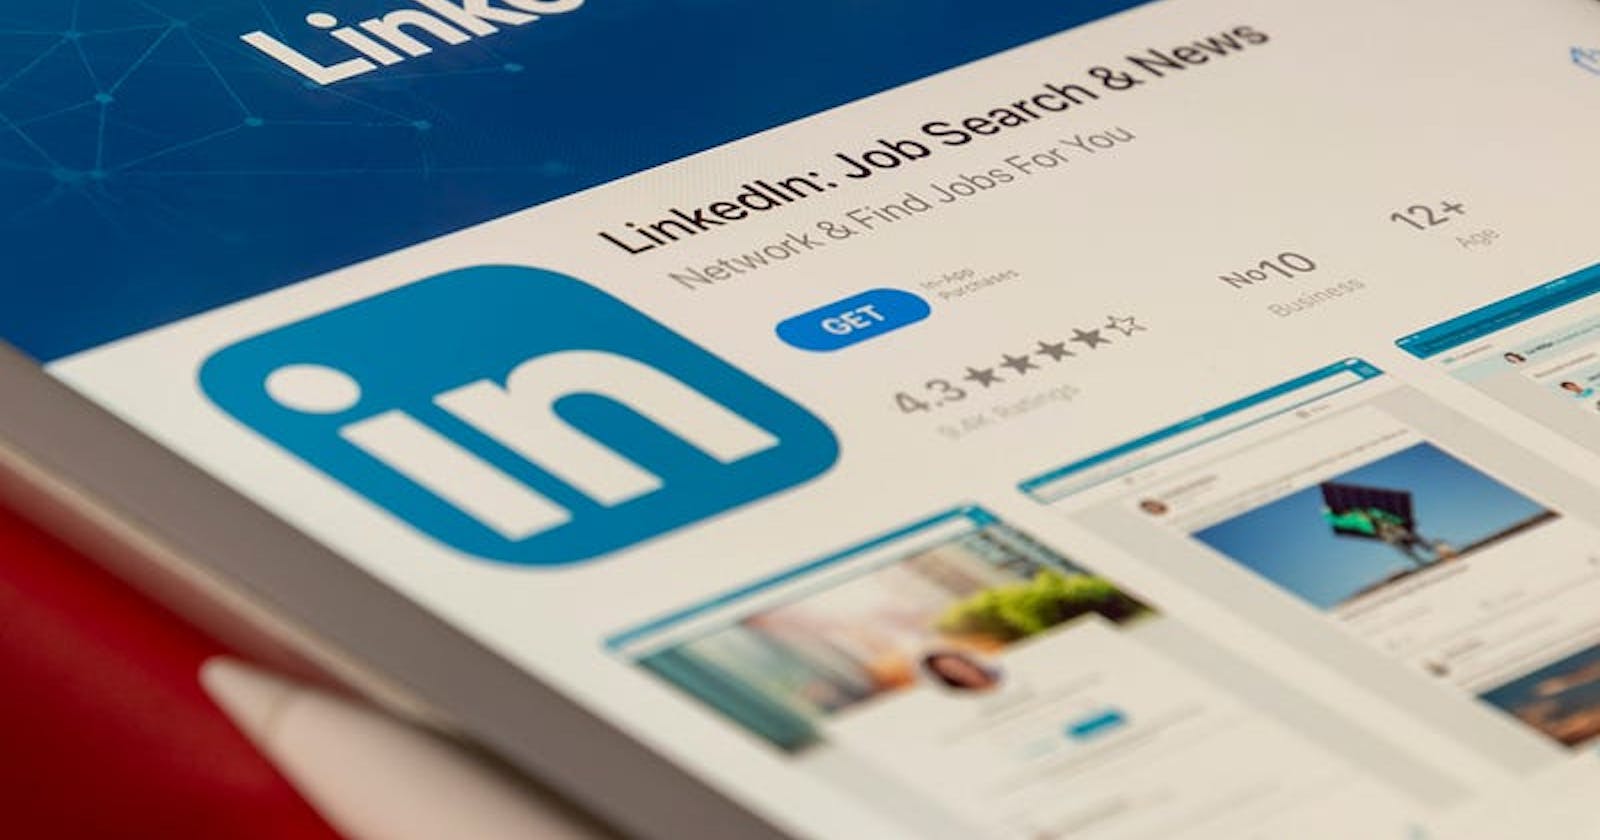 10 Reasons Why LinkedIn is Essential for Your Job Search